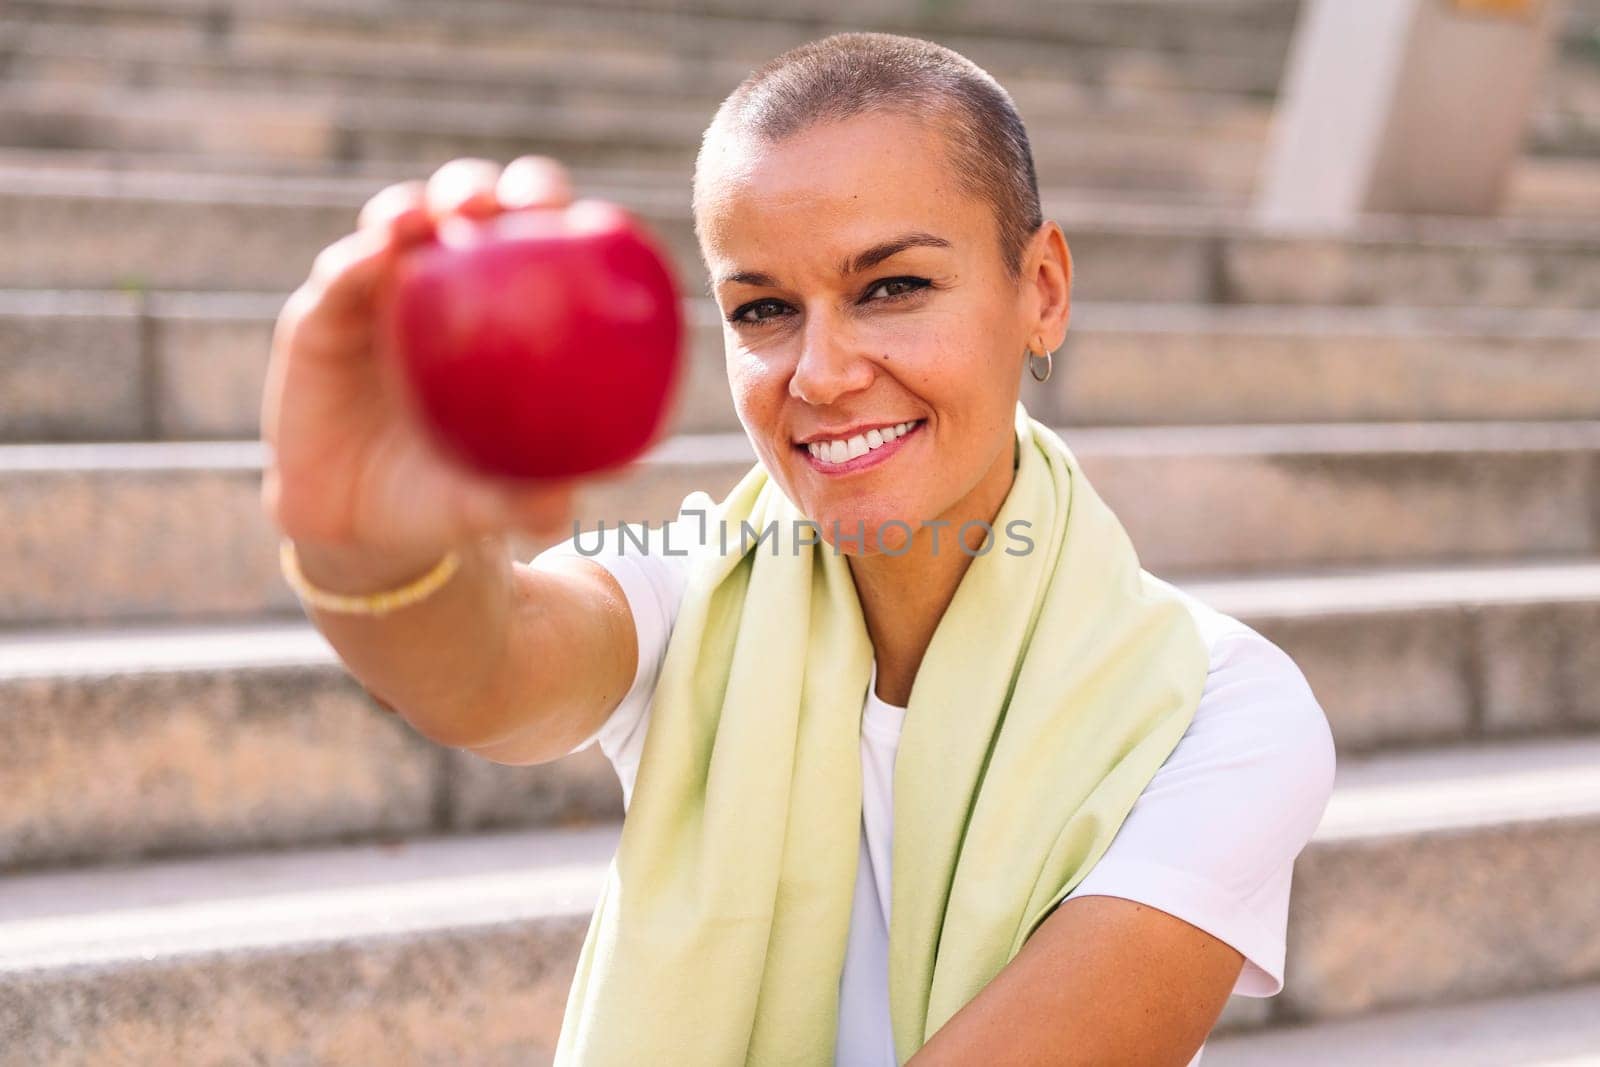 young sports woman showing an apple after workout, concept of healthy and active lifestyle, focus on the smiling face